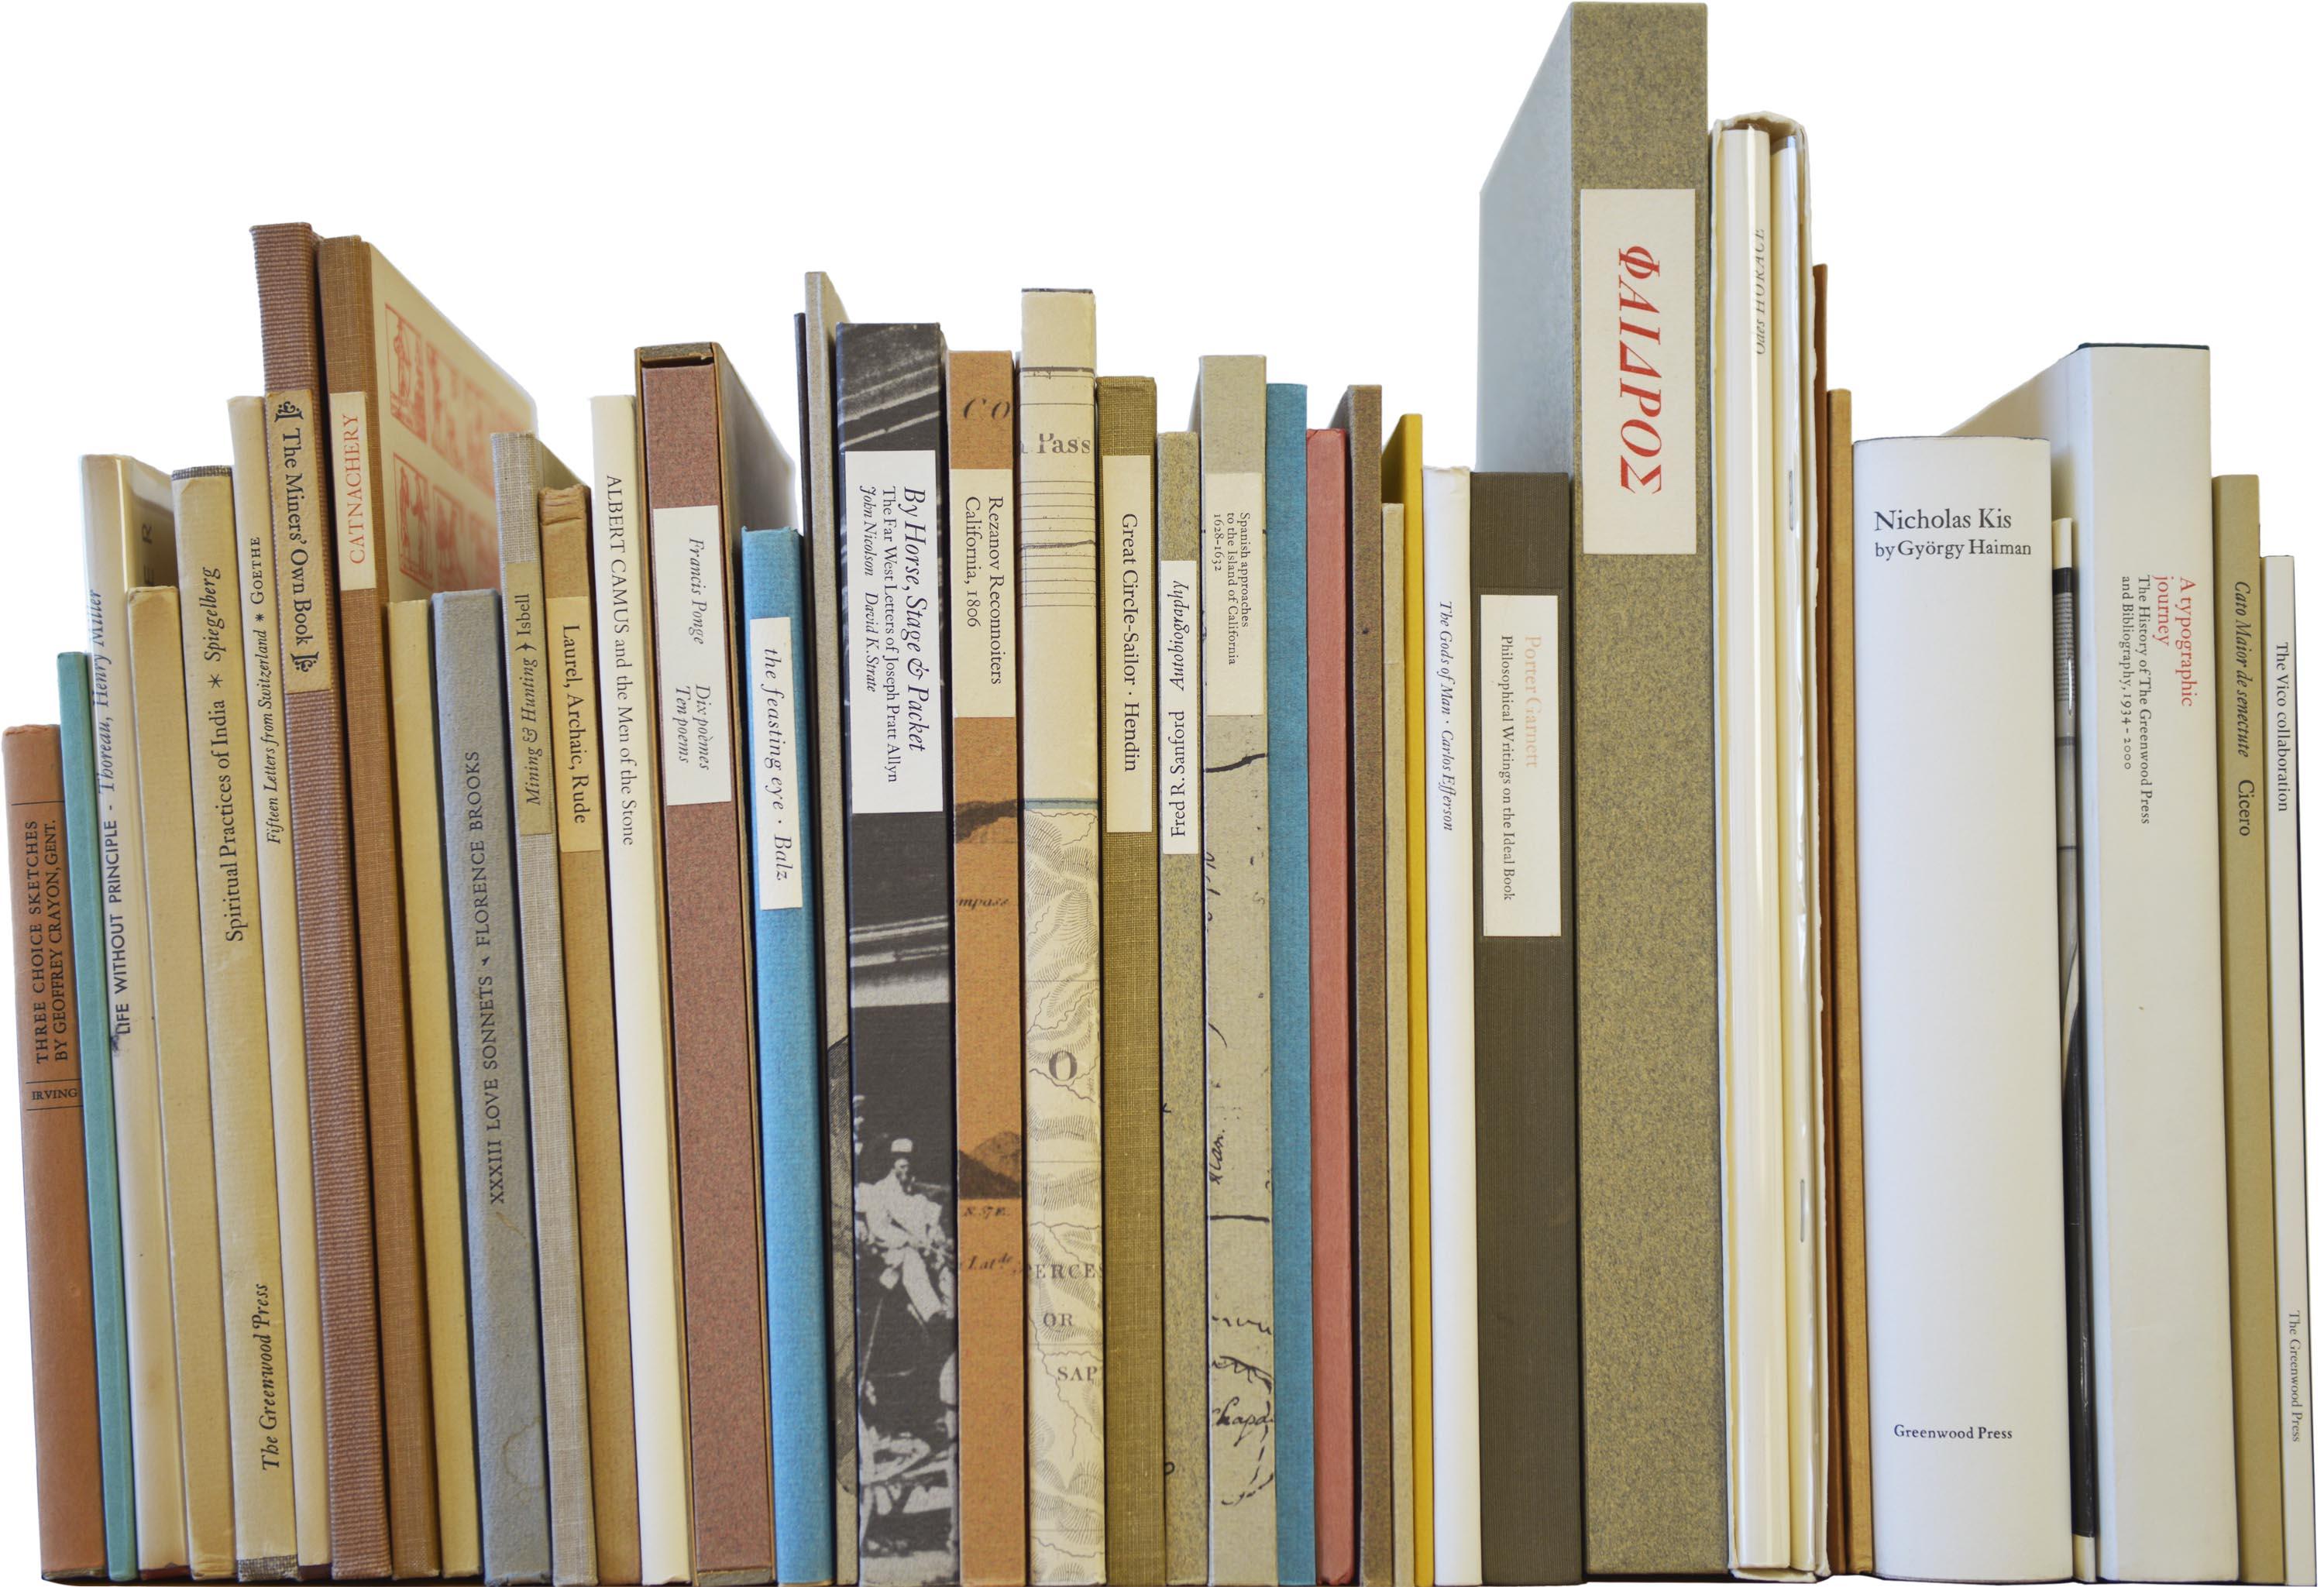 Books by Jack Stauffacher, including editions for the Greenwood Press and Book Club of California, 1941–2004.